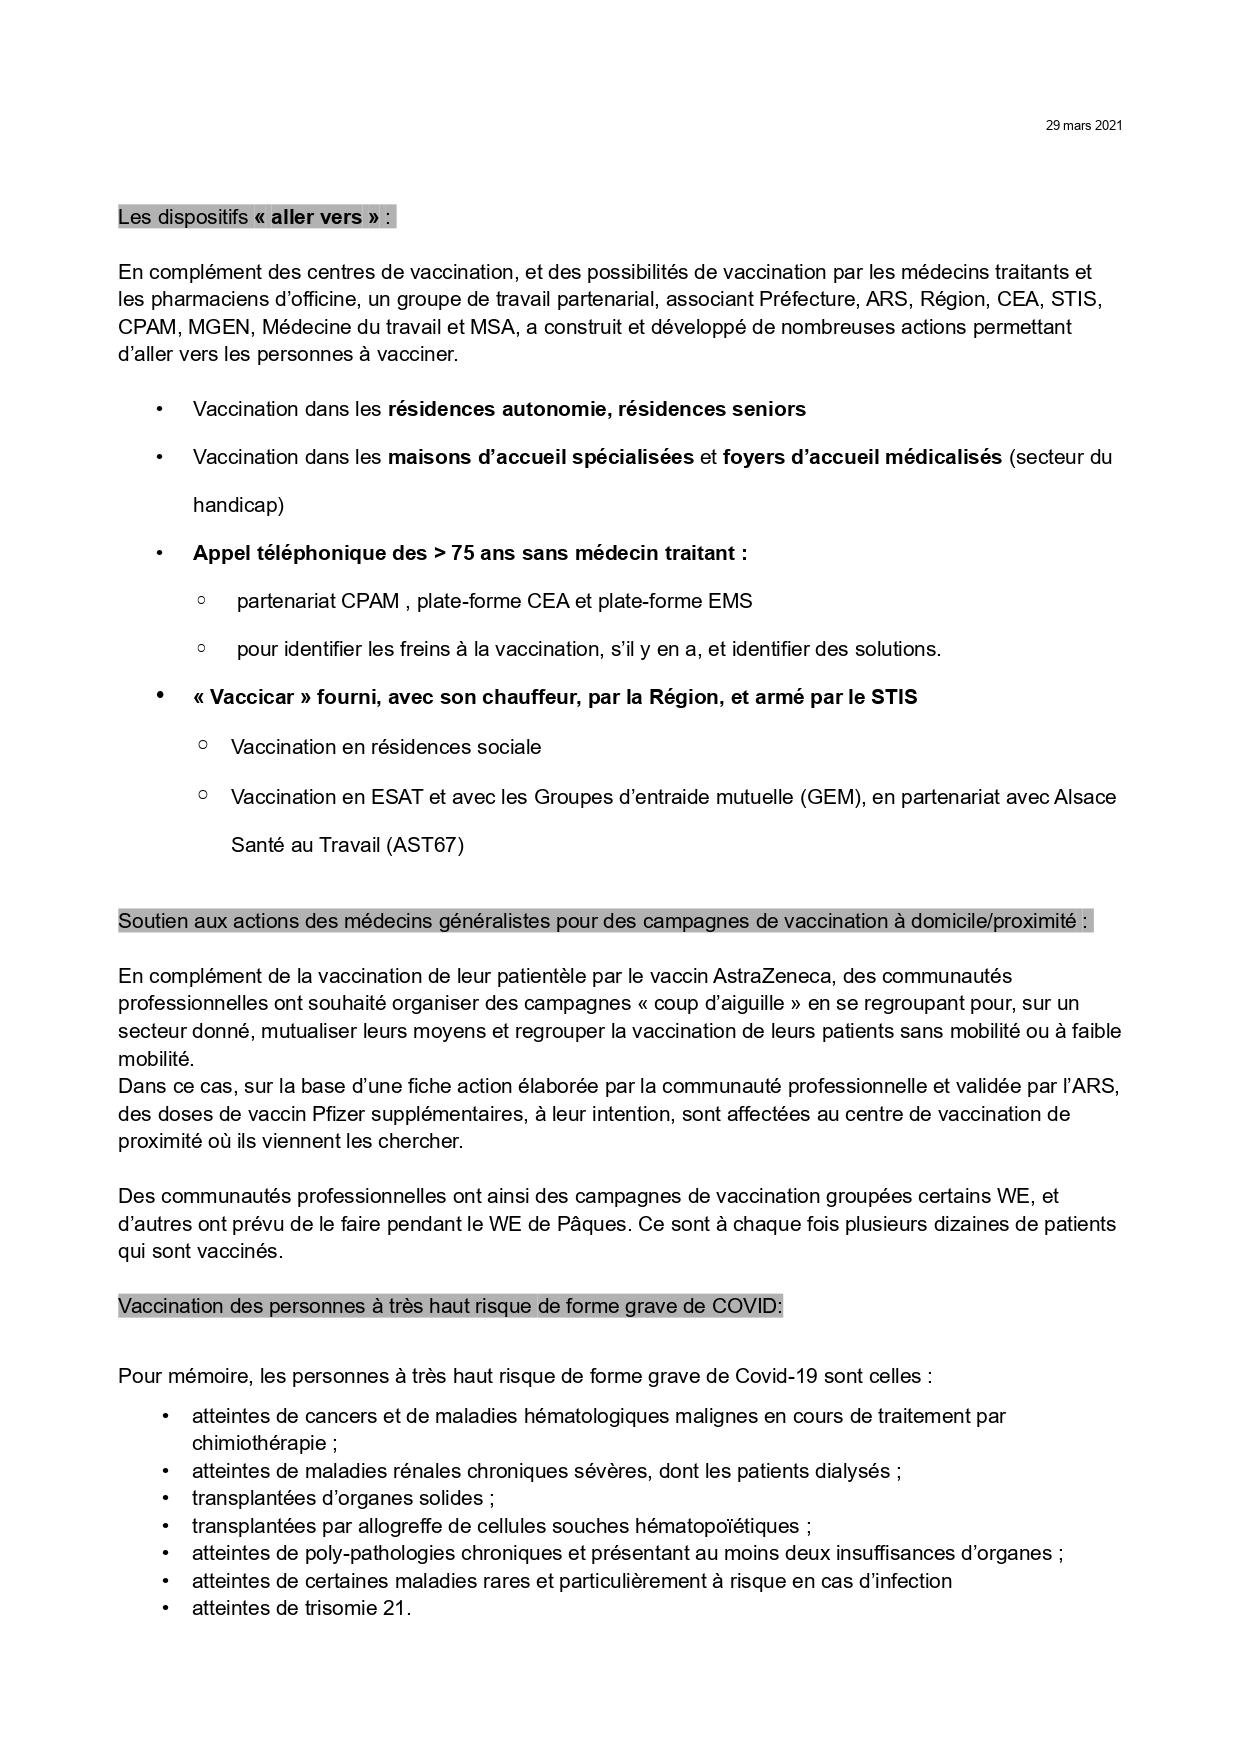 210329 vaccination - information n°5_page-0003